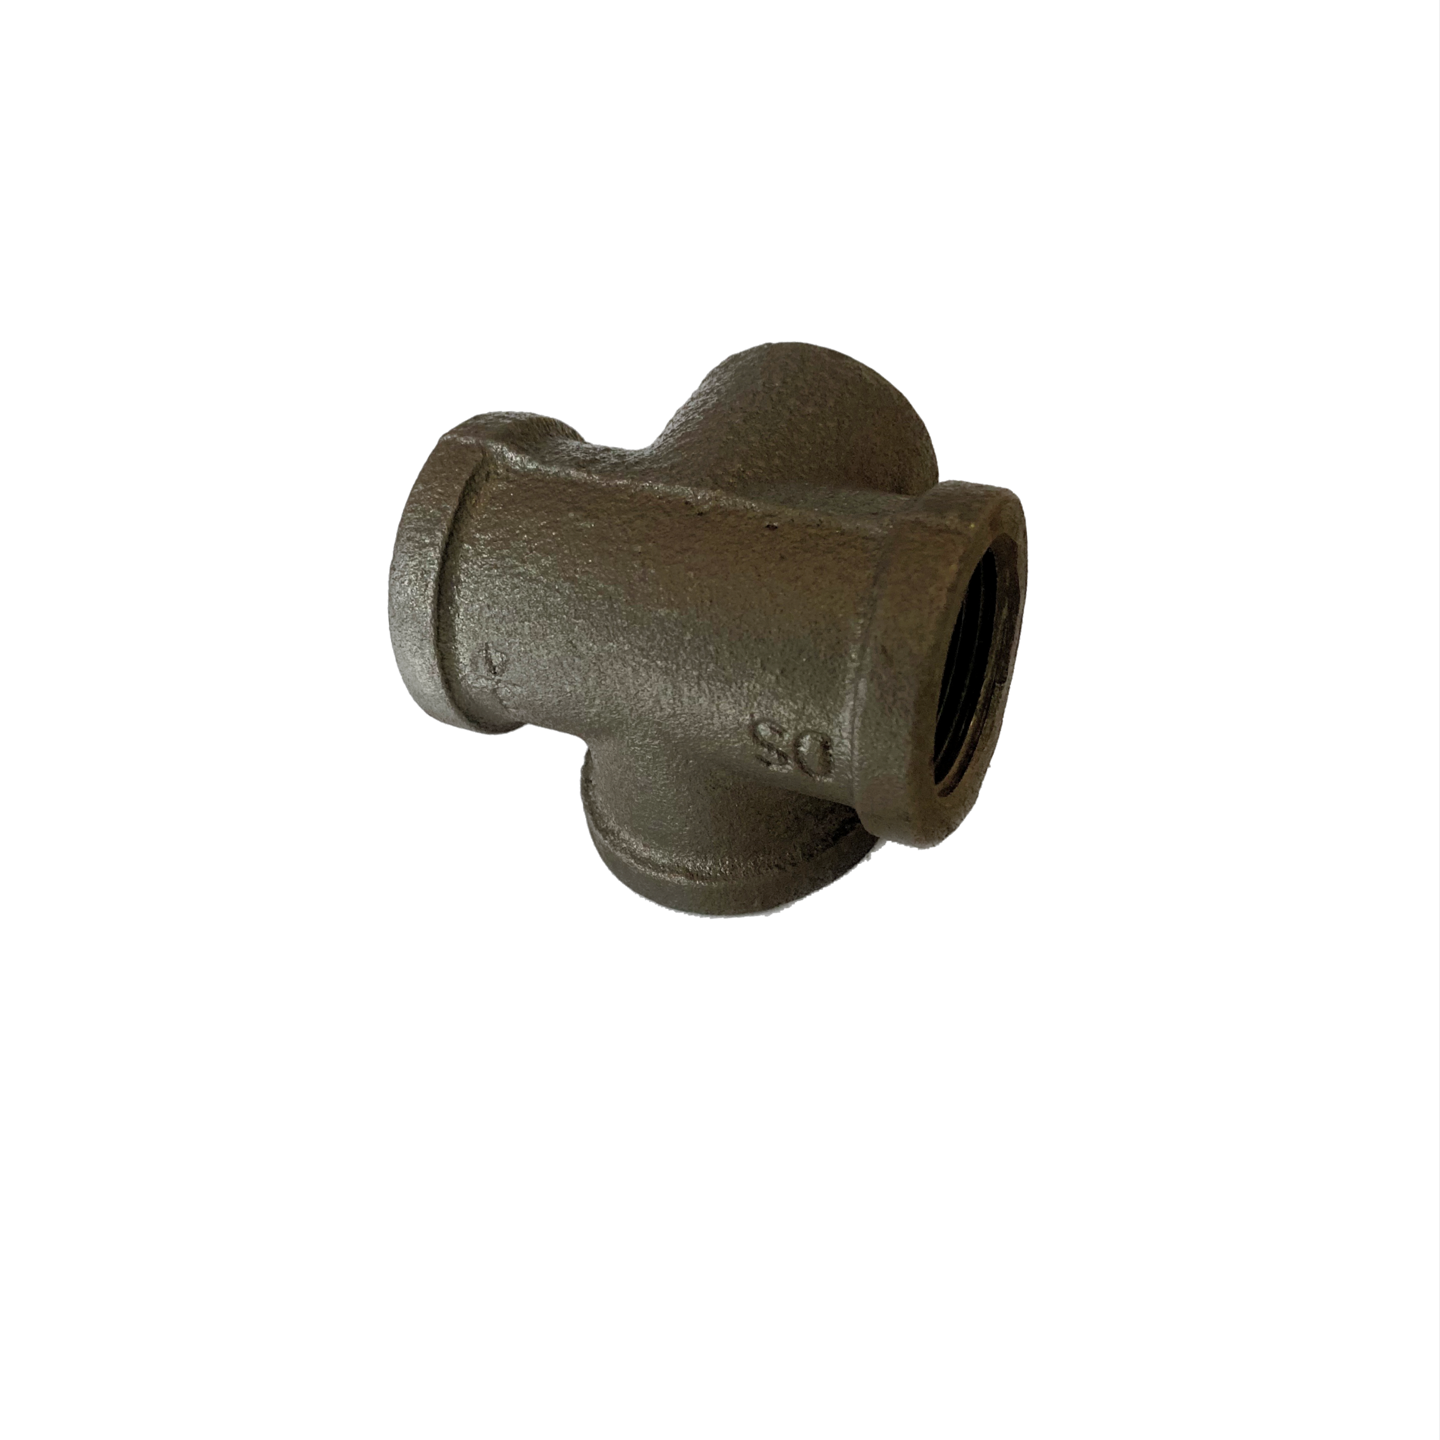 Black Malleable Iron Threaded Side Outlet Tees - 4 Way Corner